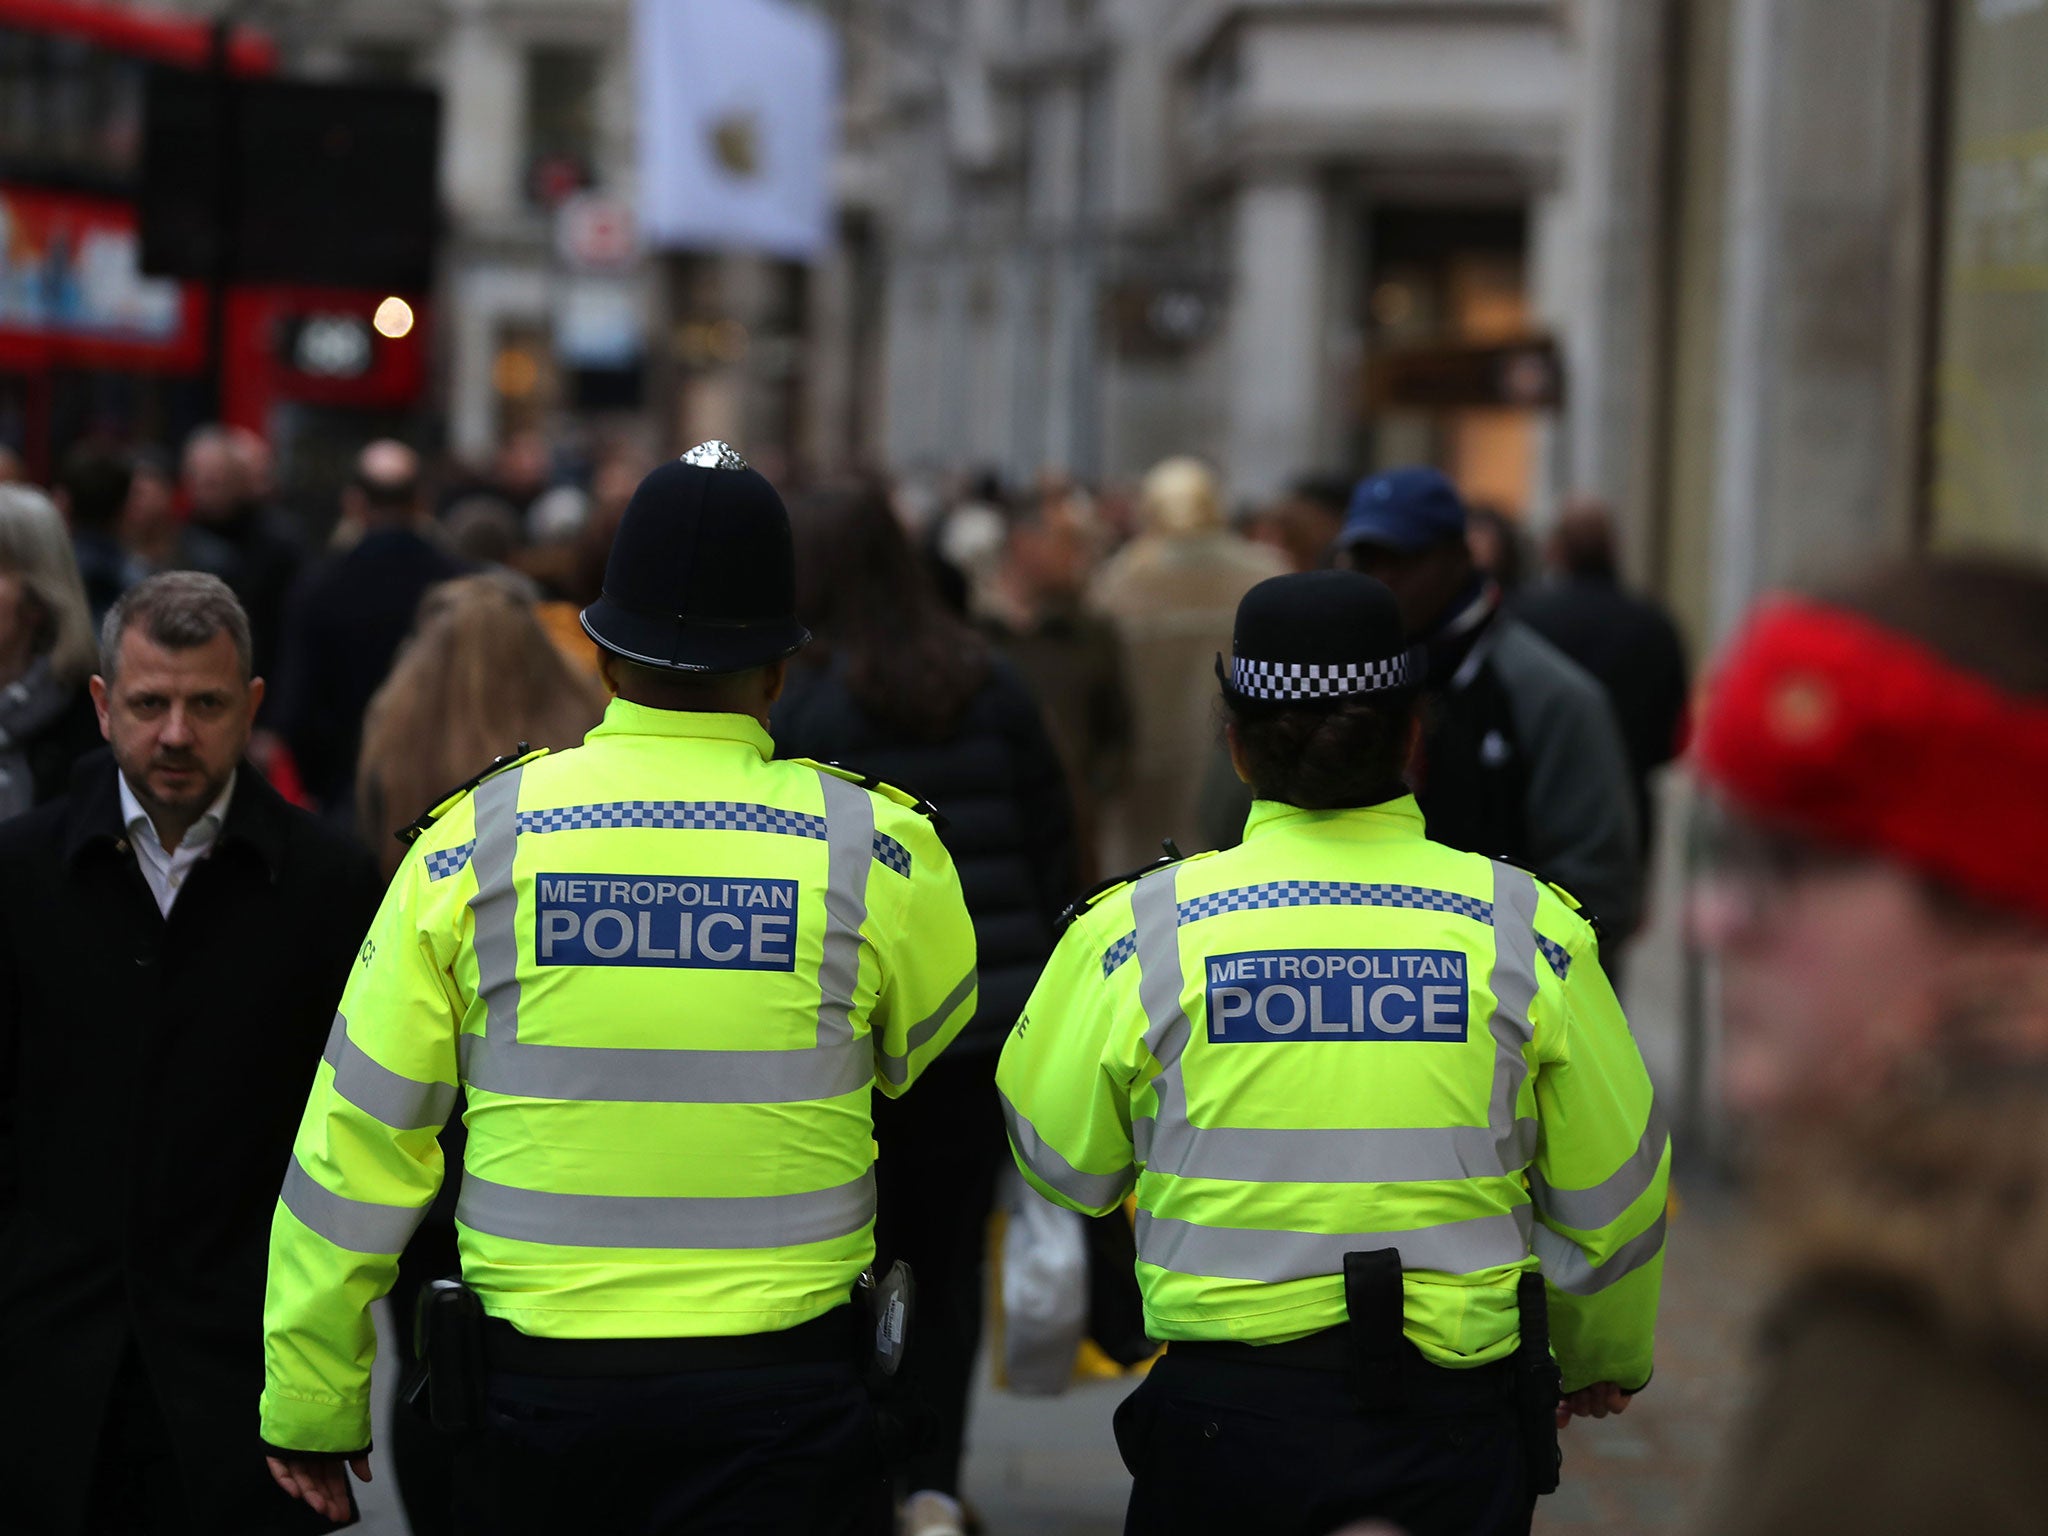 Police are contacting women secretly so they do not ‘escalate’ the threat